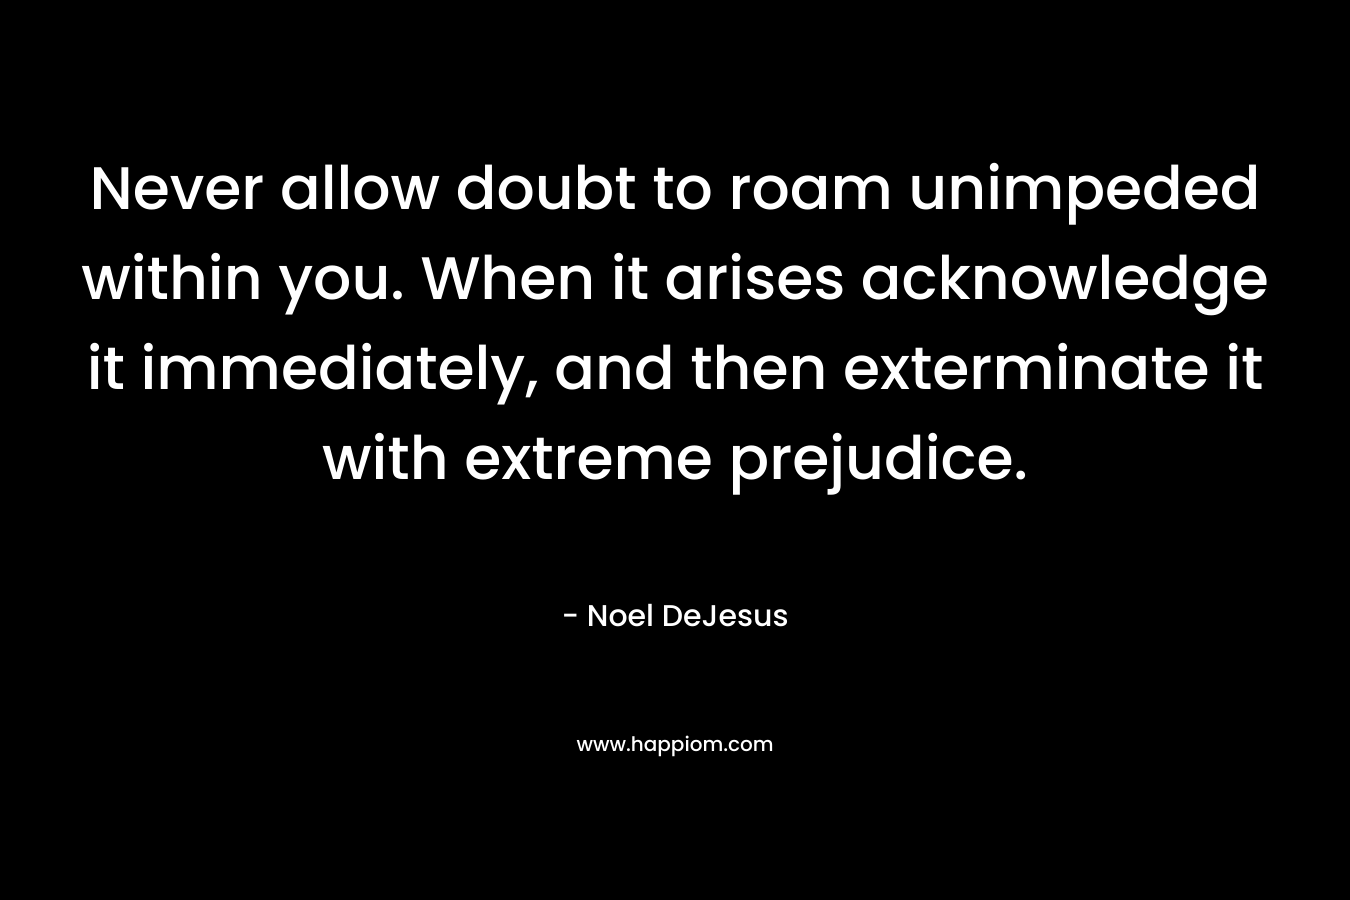 Never allow doubt to roam unimpeded within you. When it arises acknowledge it immediately, and then exterminate it with extreme prejudice. – Noel DeJesus